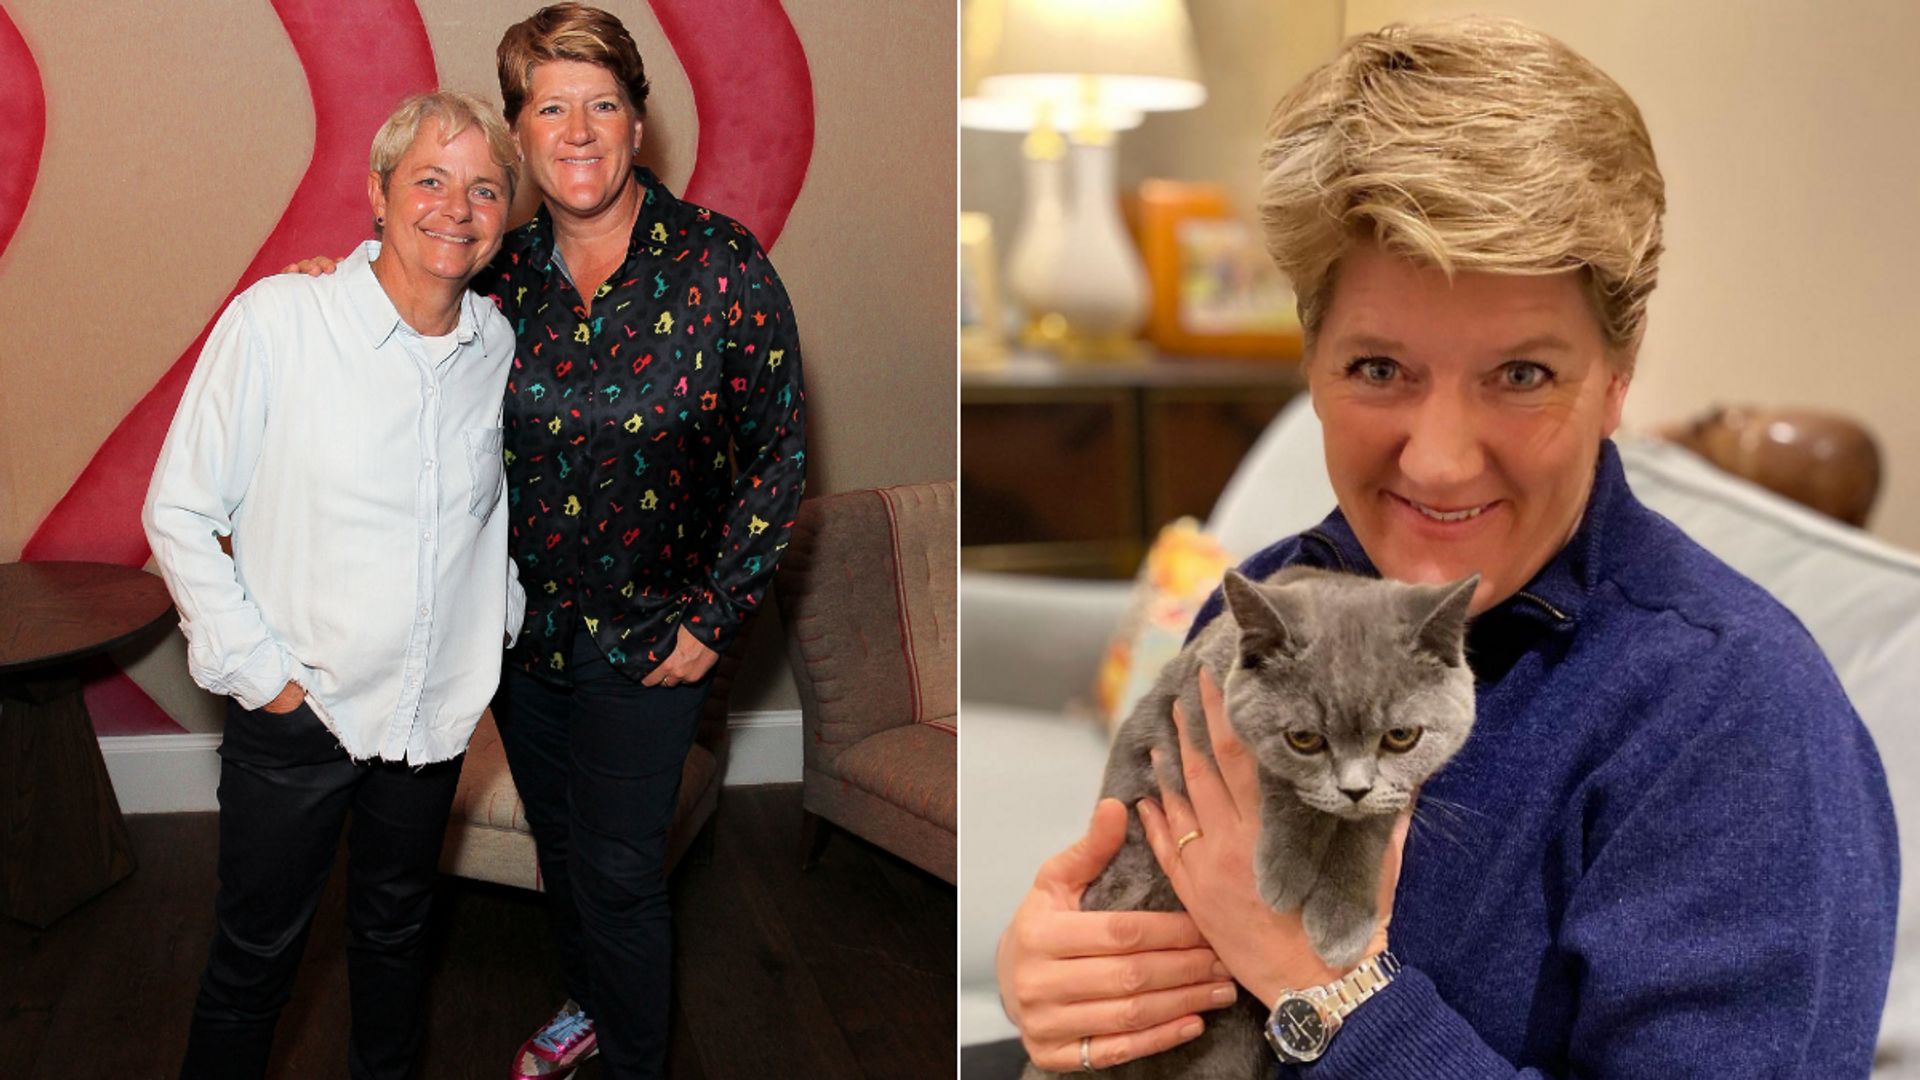 Clare Balding's luxe home with wife Alice Arnold and adorable cats - best photos